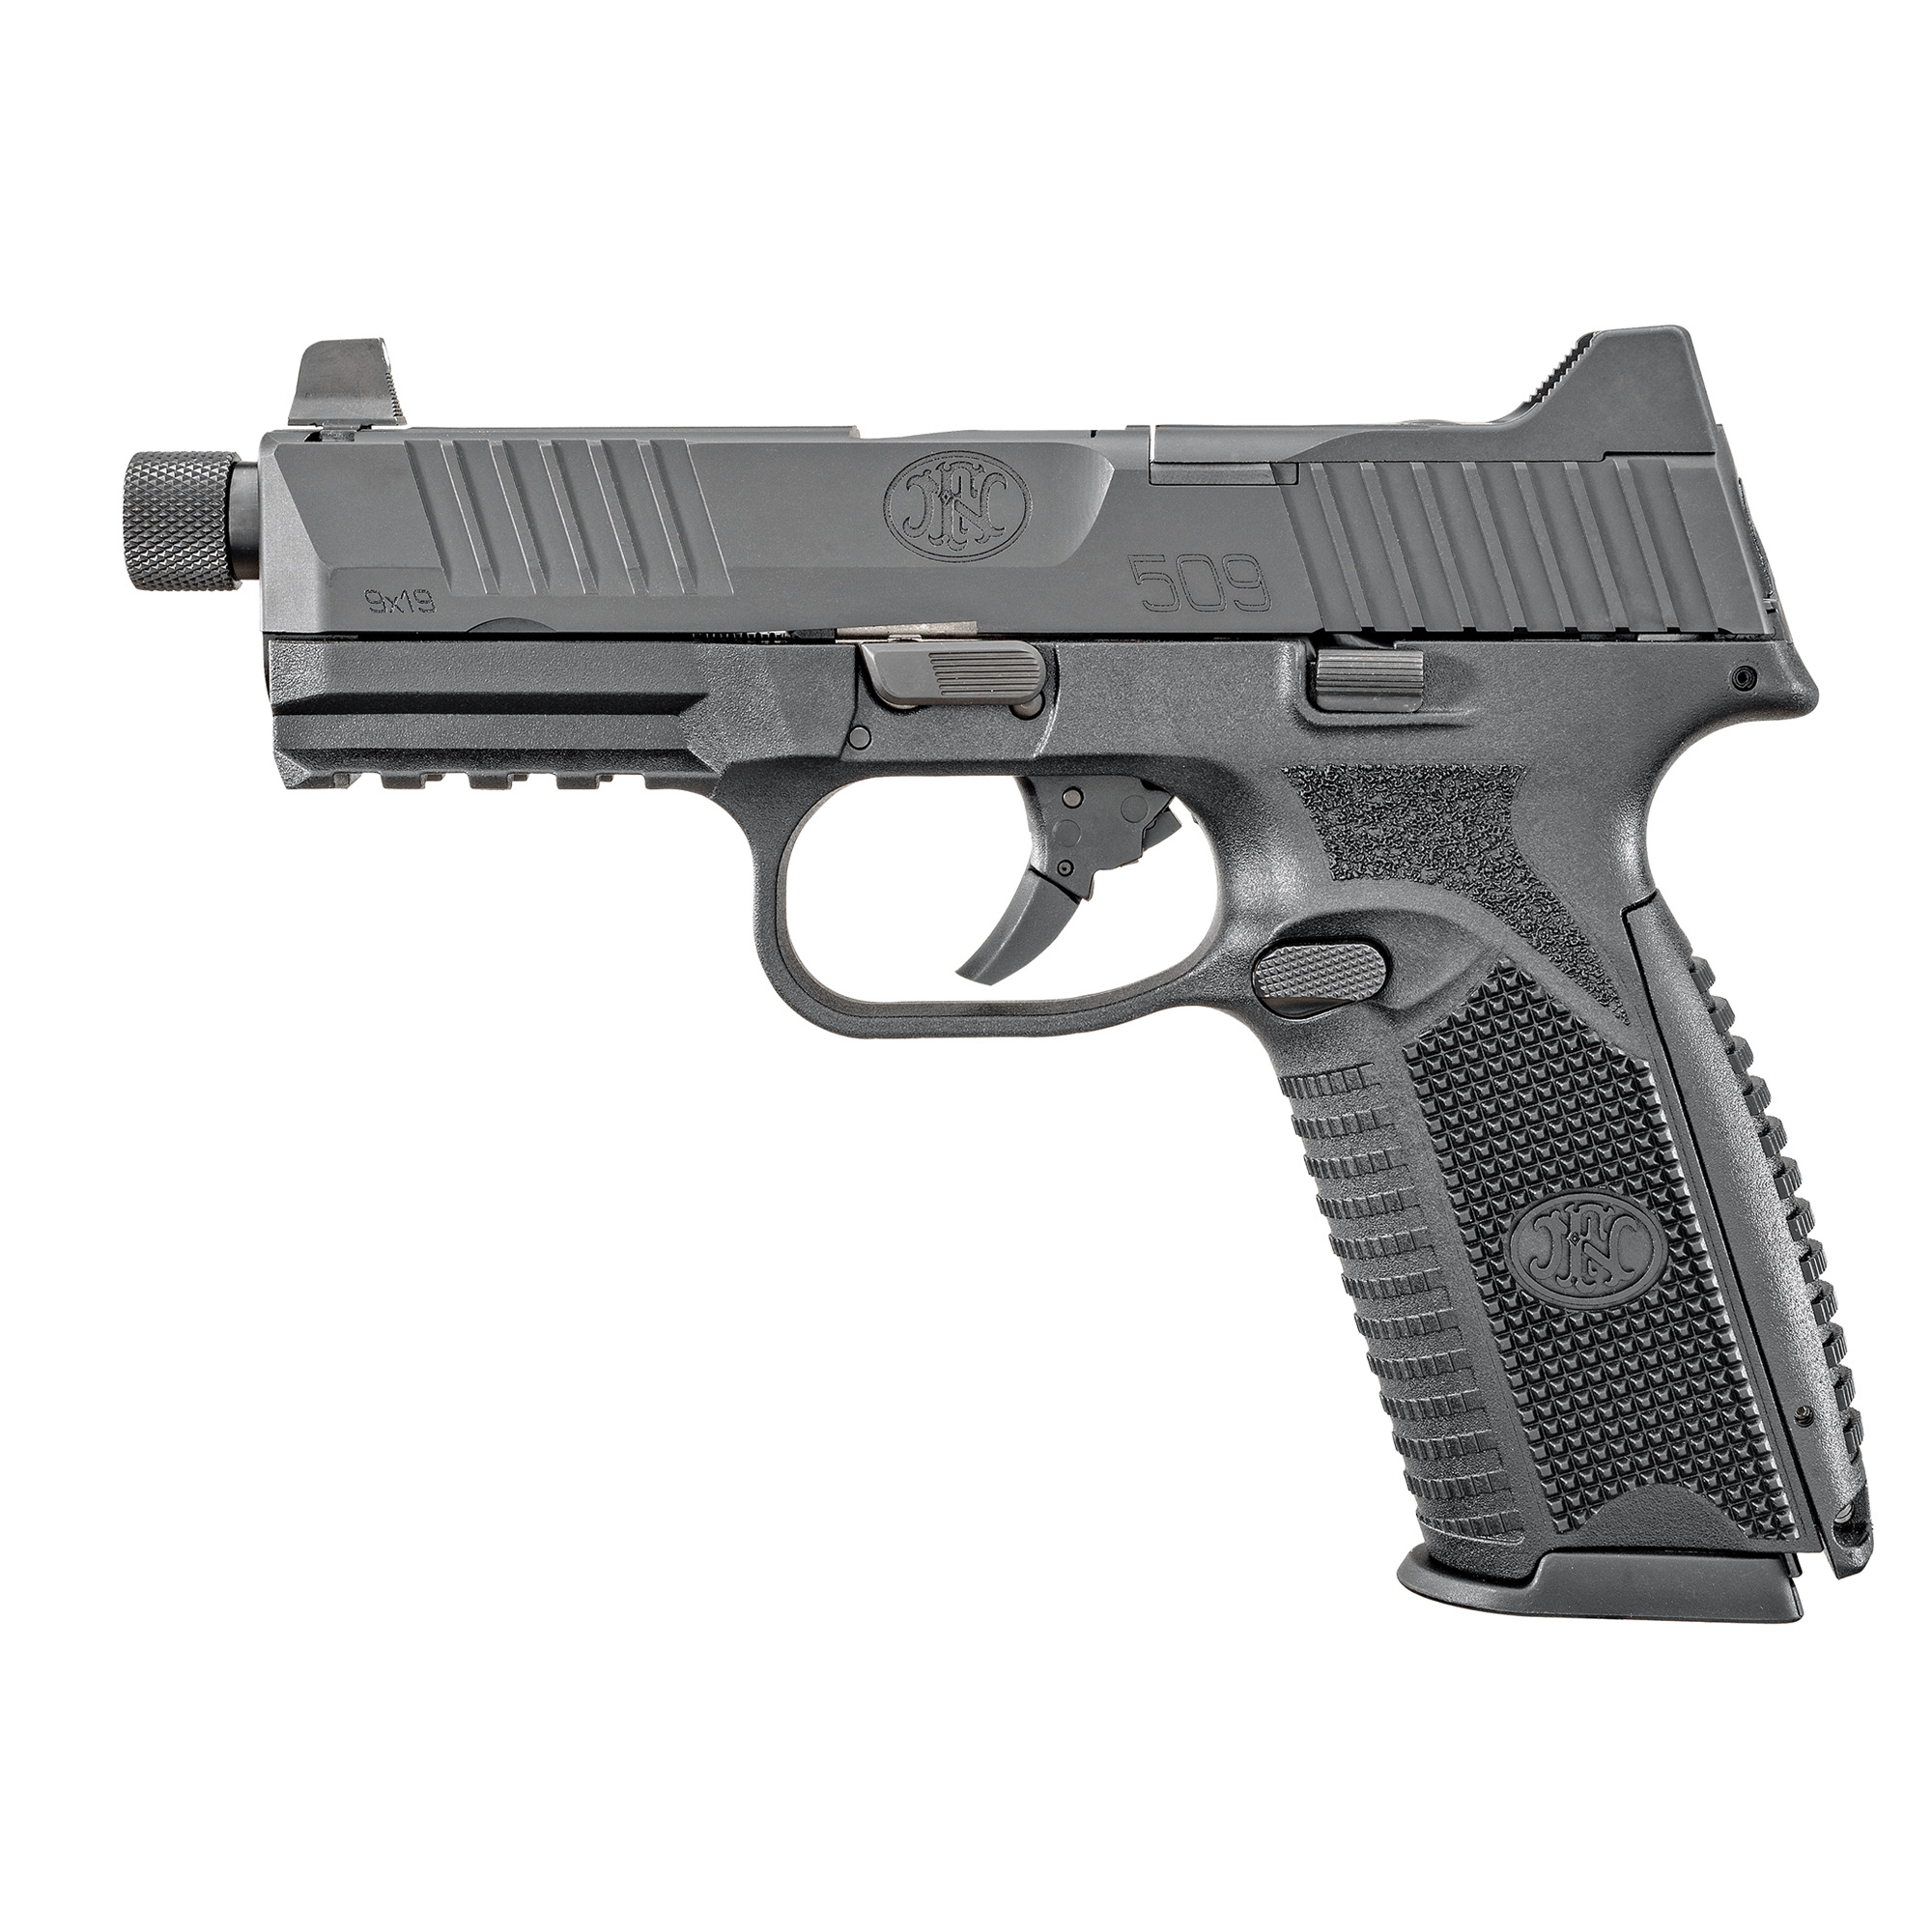 FN 509T BNDL 9MM 4.5 10RD 5 MAGS BLK